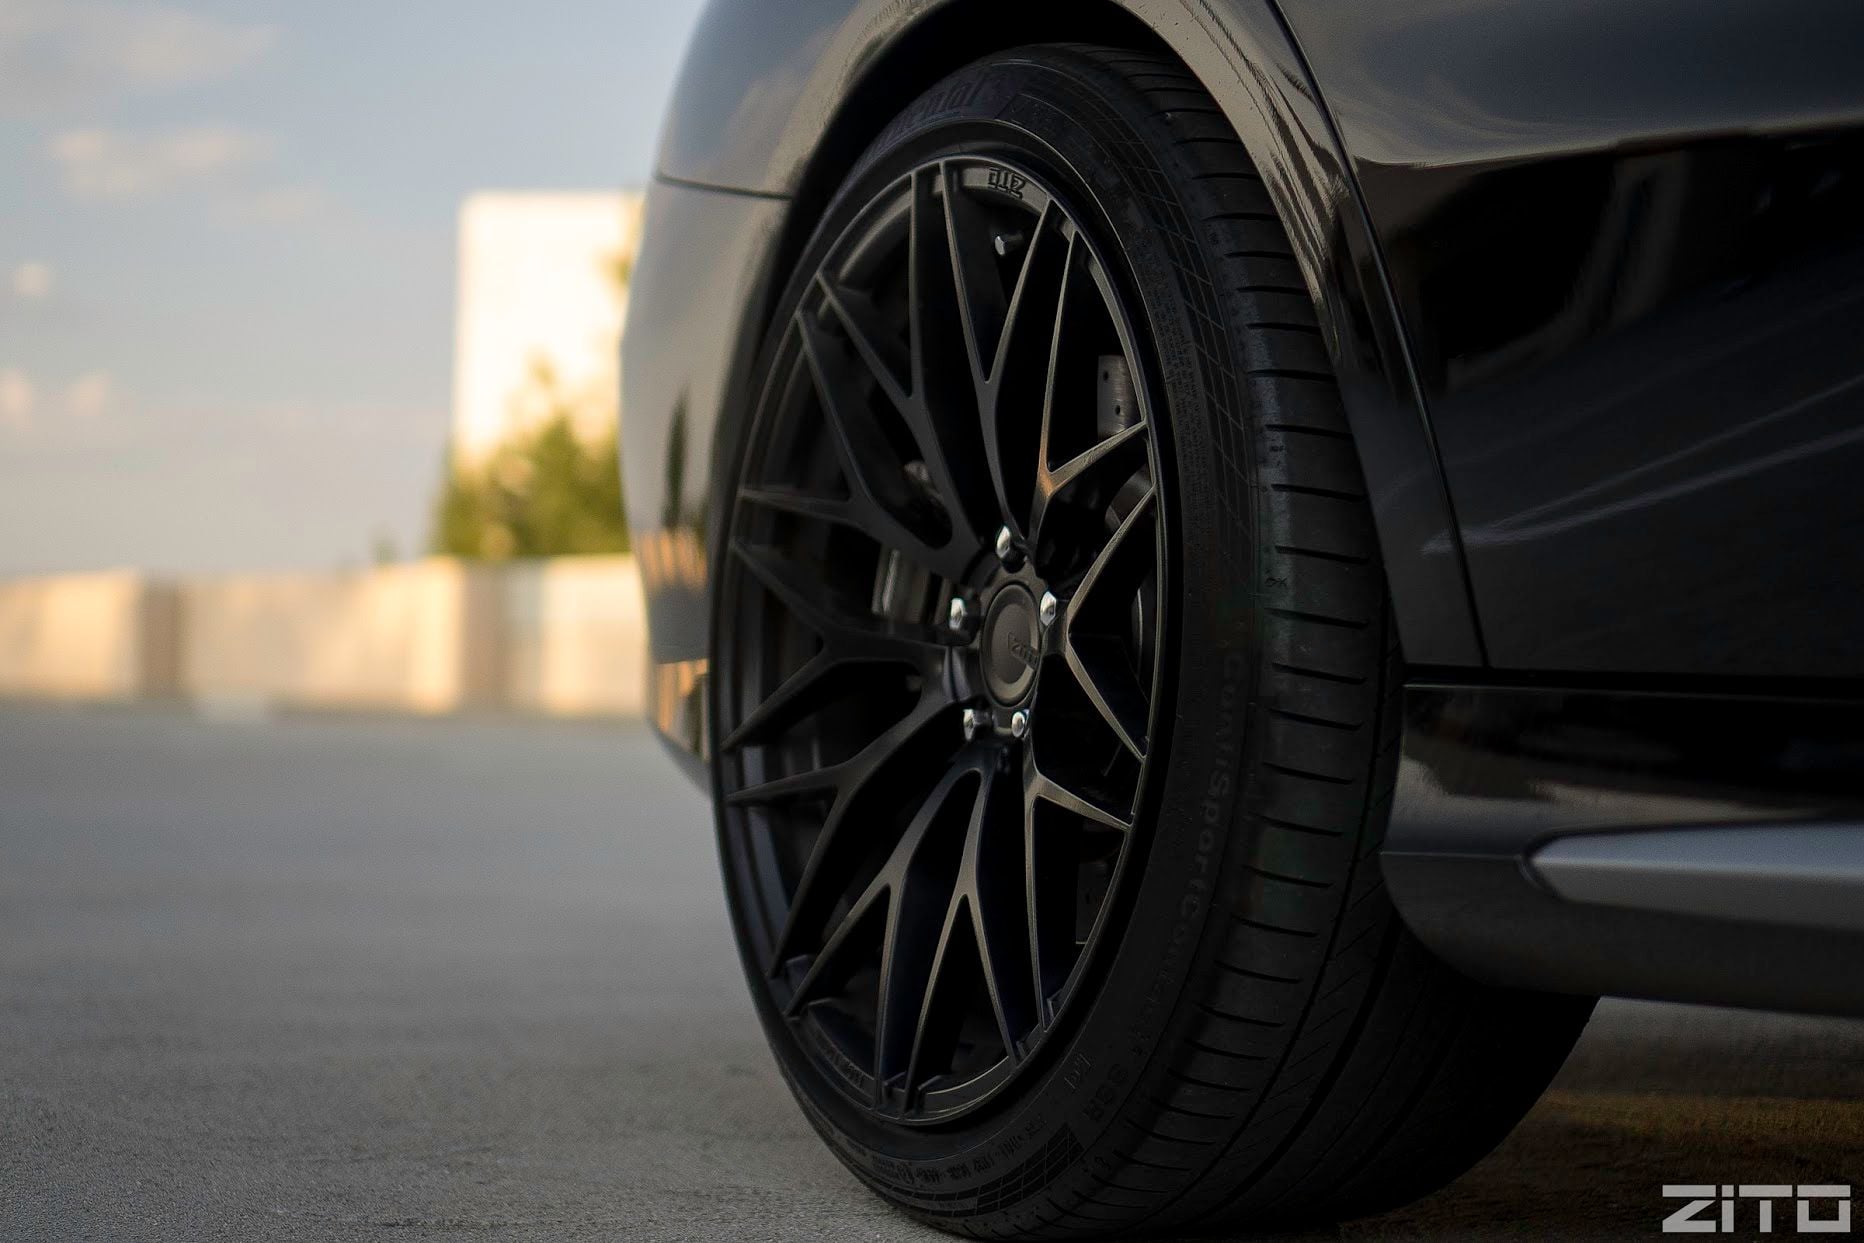 Wheels and Tires/Axles - Zito ZF01 For Sale! Perfect fitment for C63/E63/CLS63 - Used - Irvine, CA 92618, United States